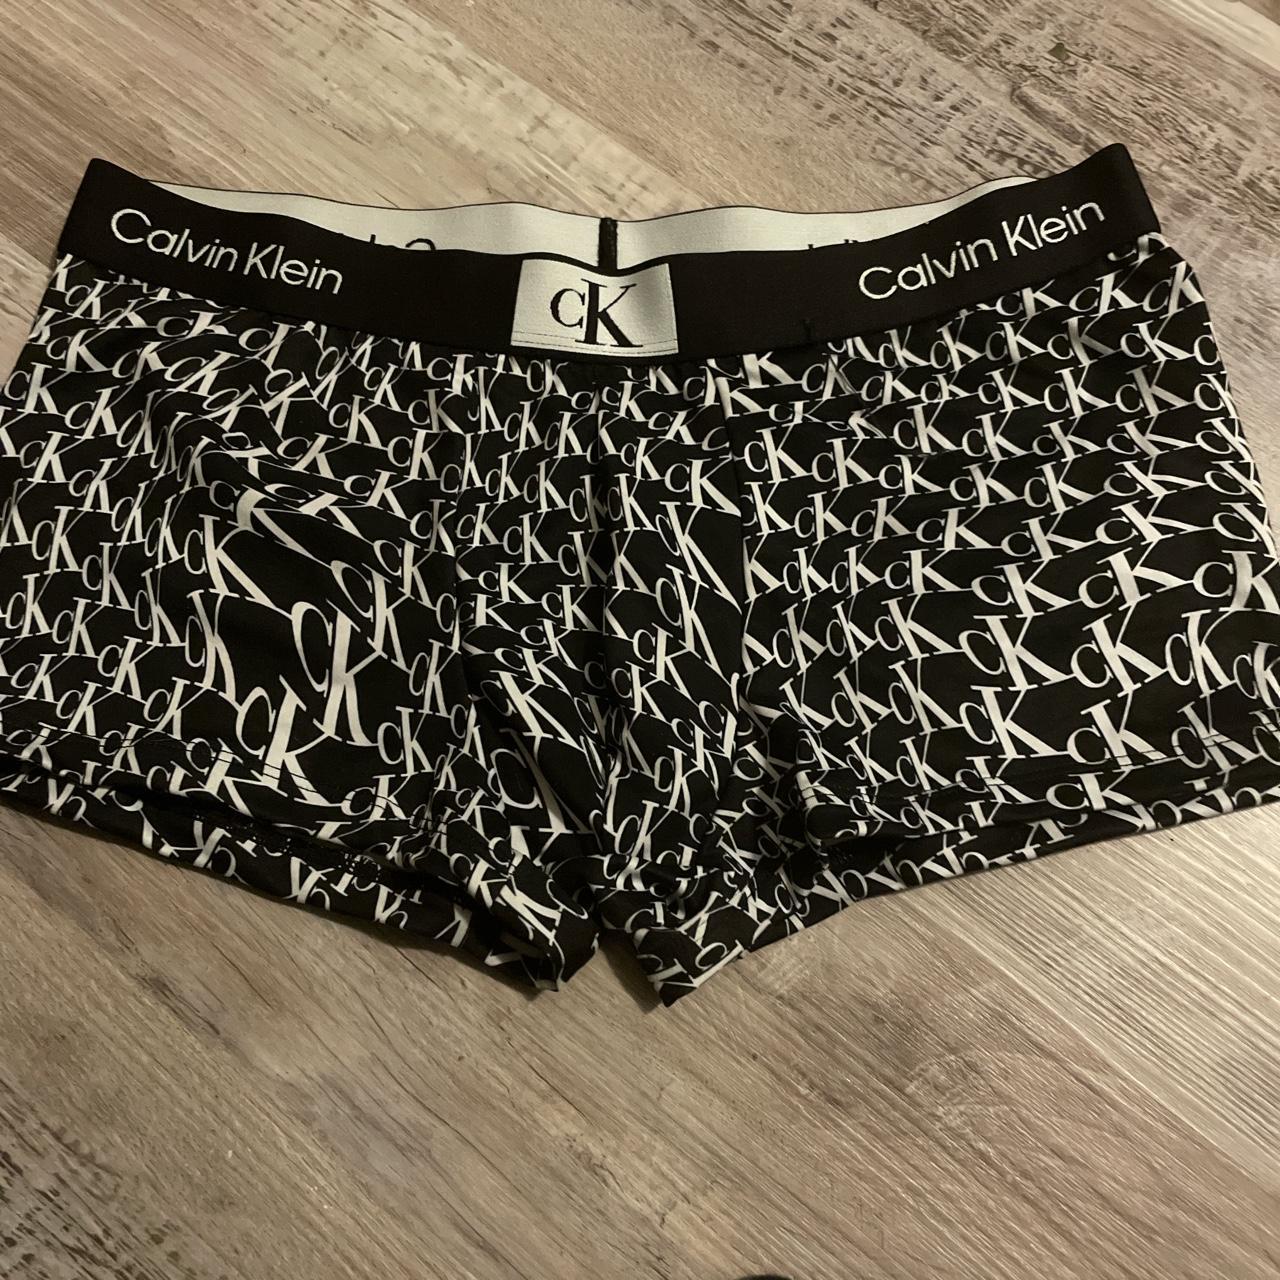 3 pair of tomboyx boxers size L washed once but - Depop